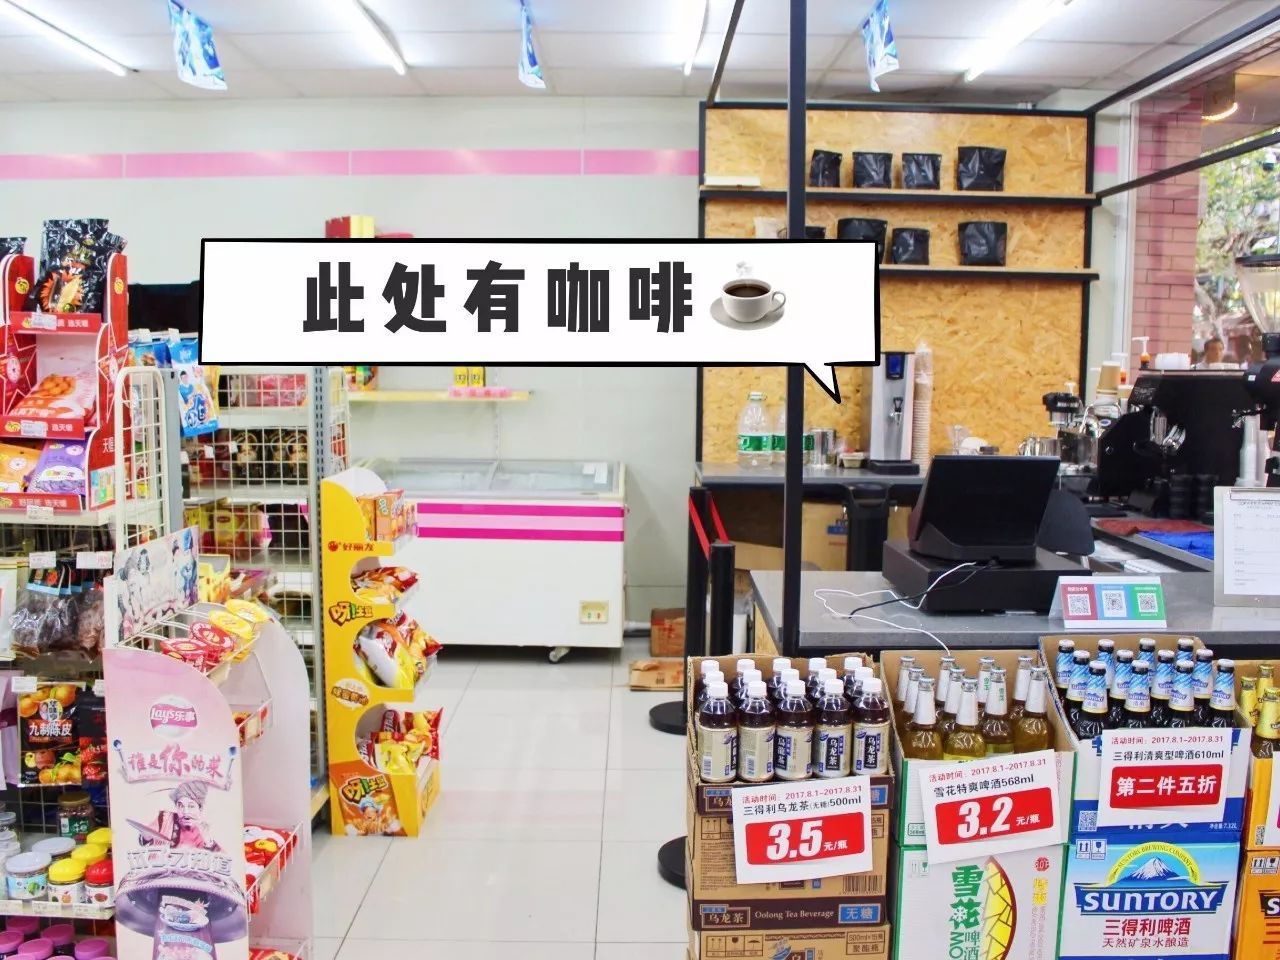 Open a boutique coffee shop into a convenience store? The boss's brain is also out of sei.